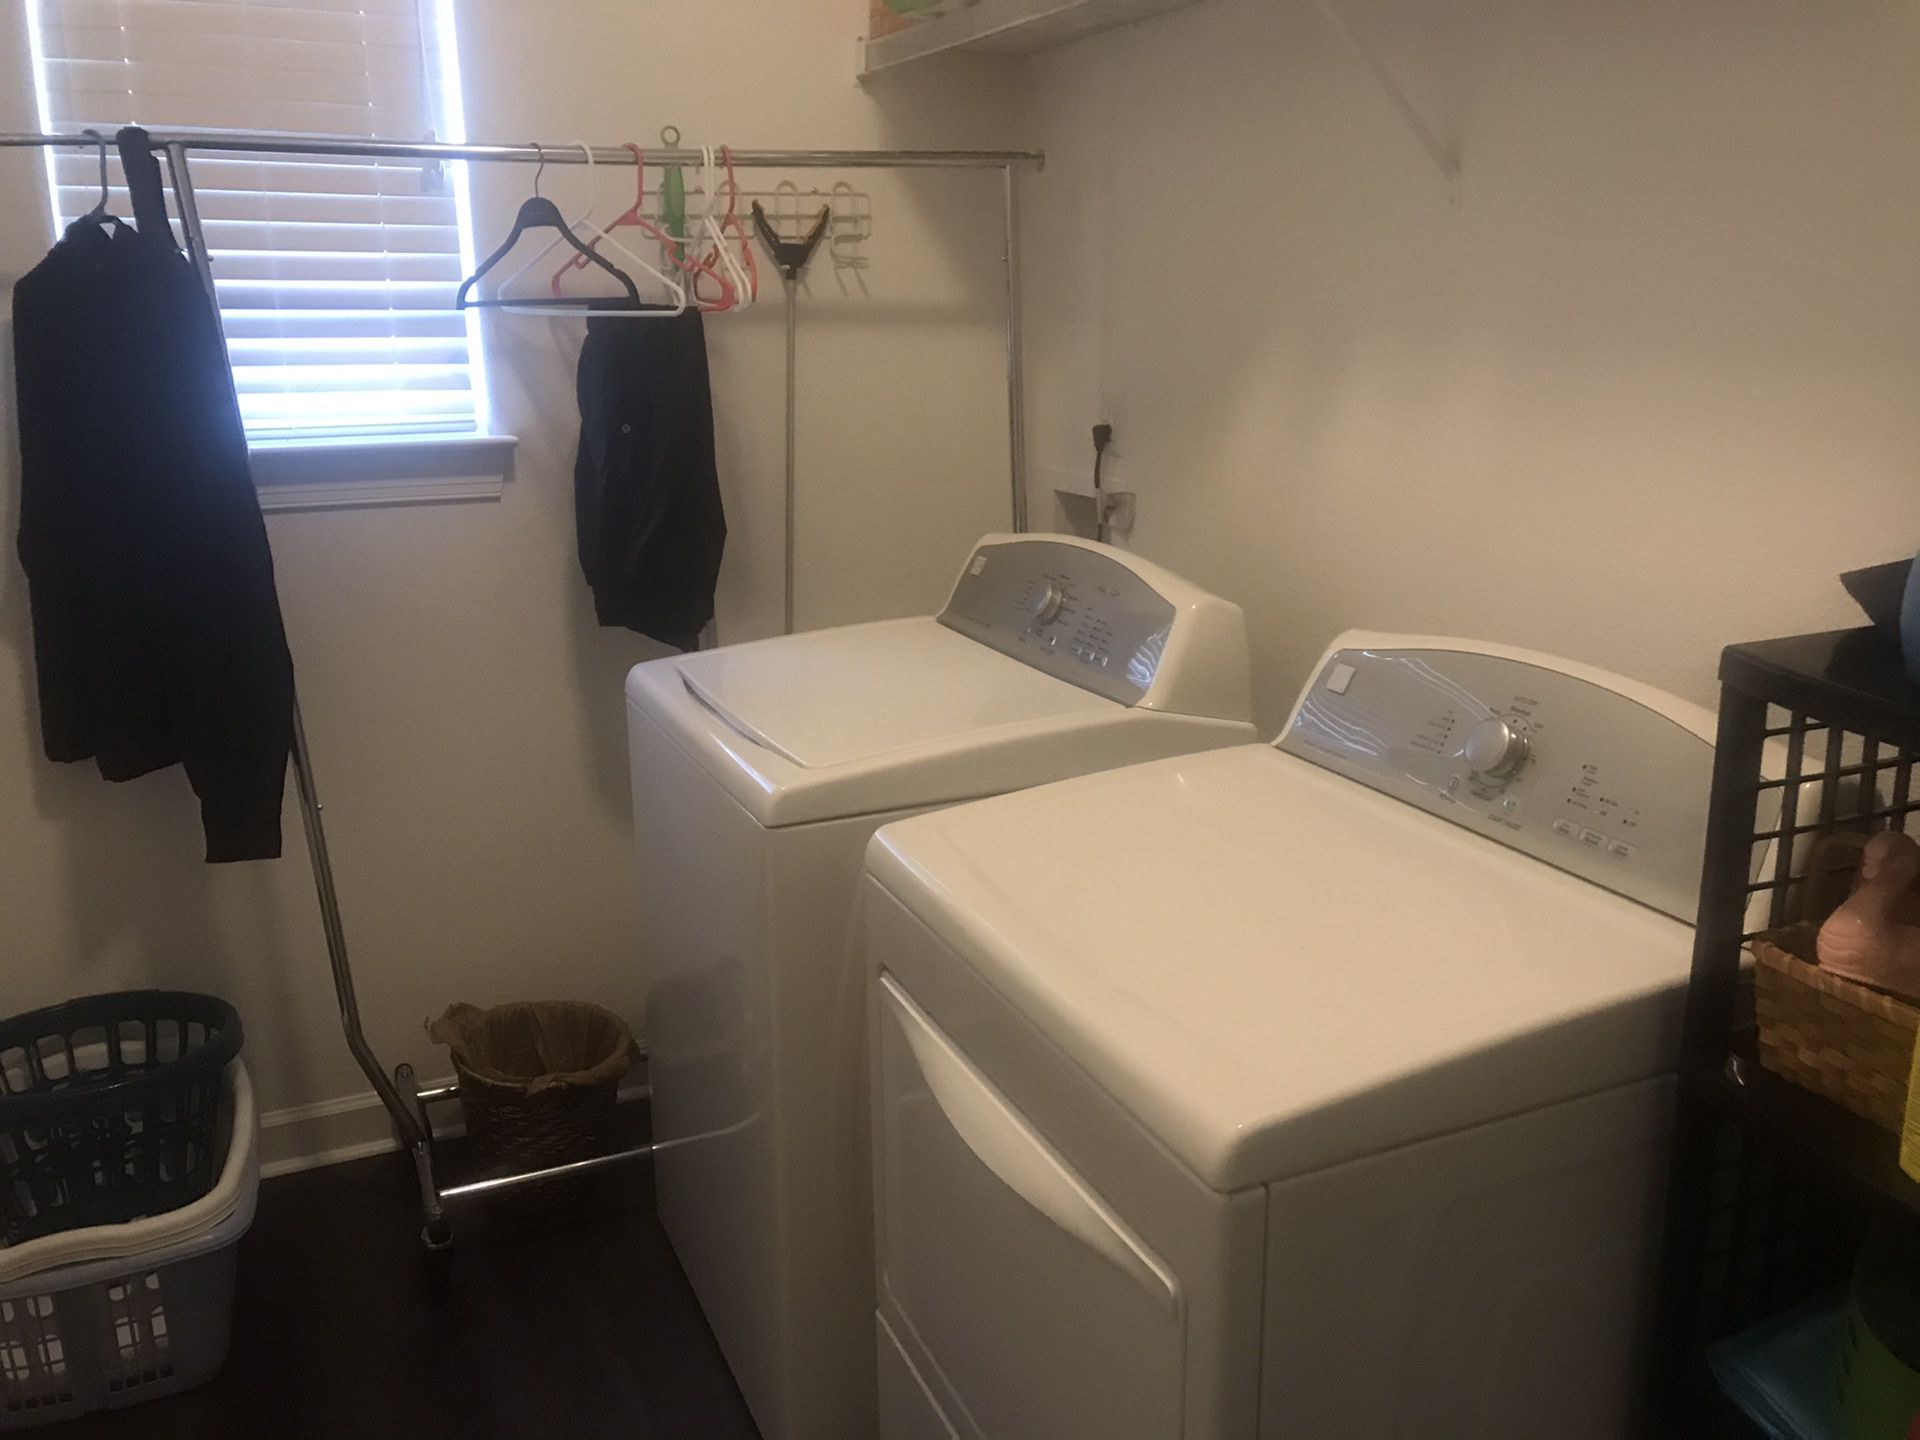 Washer and dryer kenmore